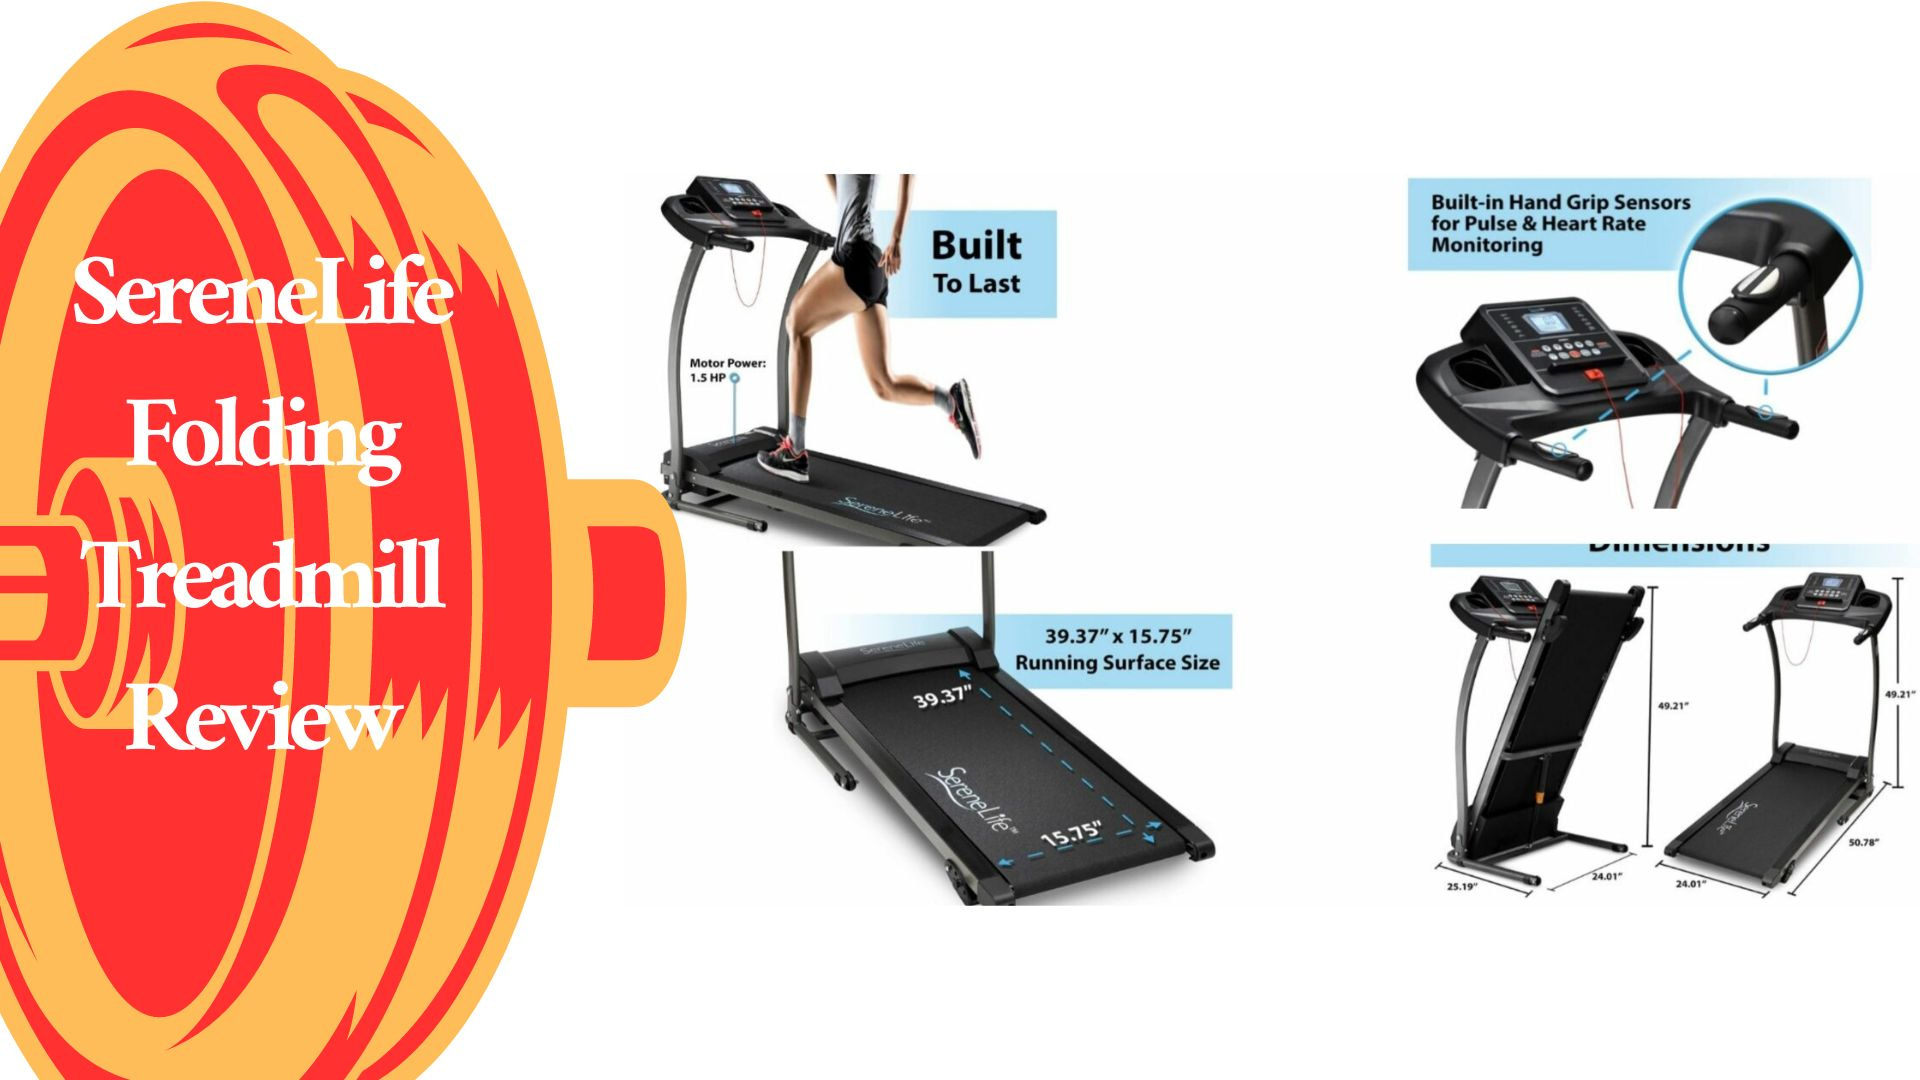 SereneLife Folding Treadmill Review